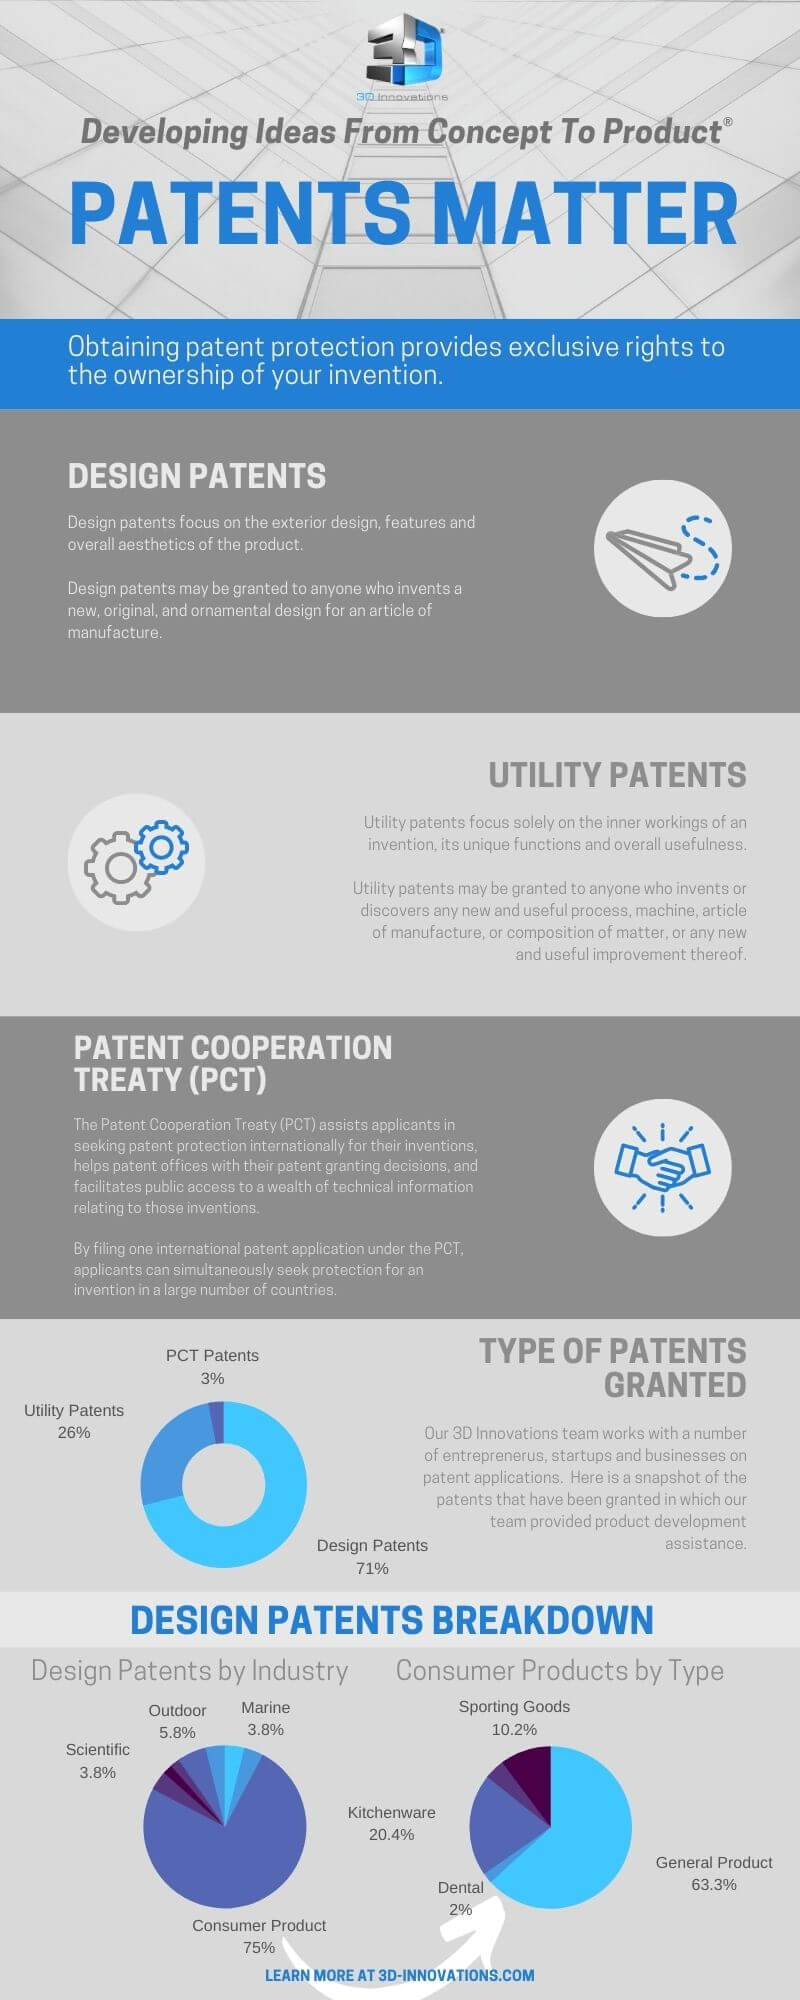 Patent protection is important for your invention and startup.